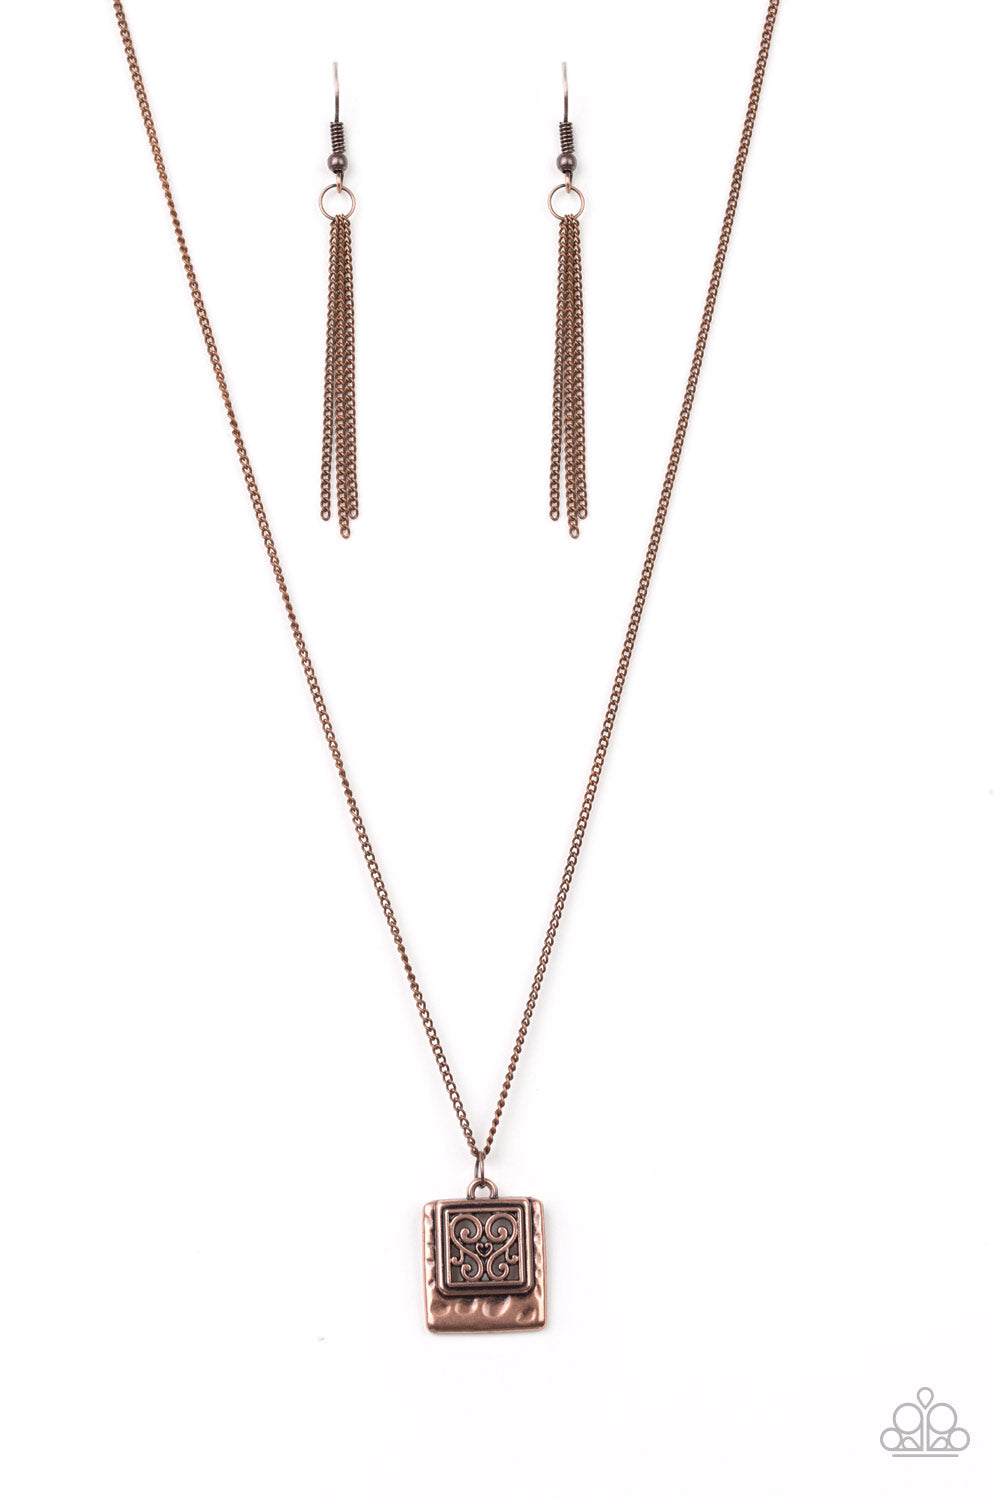 Paparazzi necklace - Back To Square One - Copper